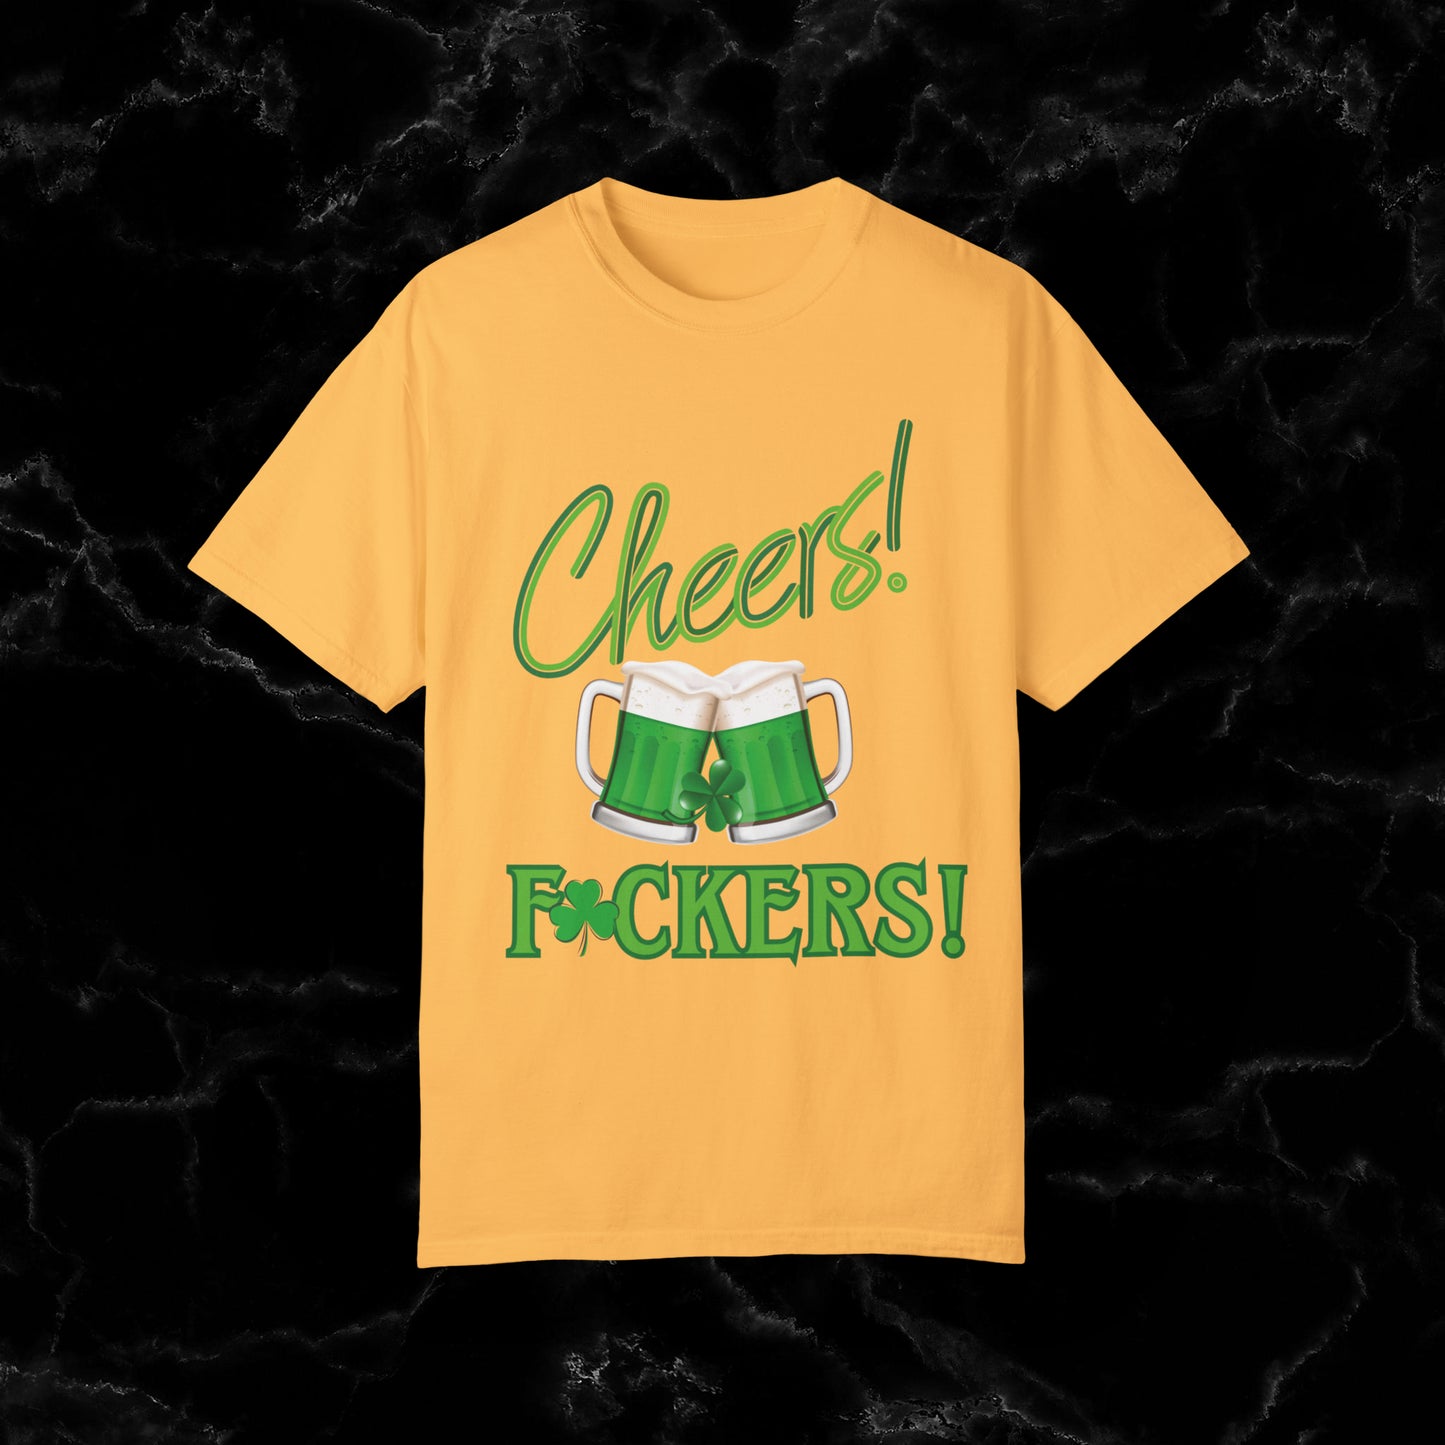 Cheers F**kers Shirt - A Bold Shamrock Statement for Irish Spirits and Good Times T-Shirt Citrus S 